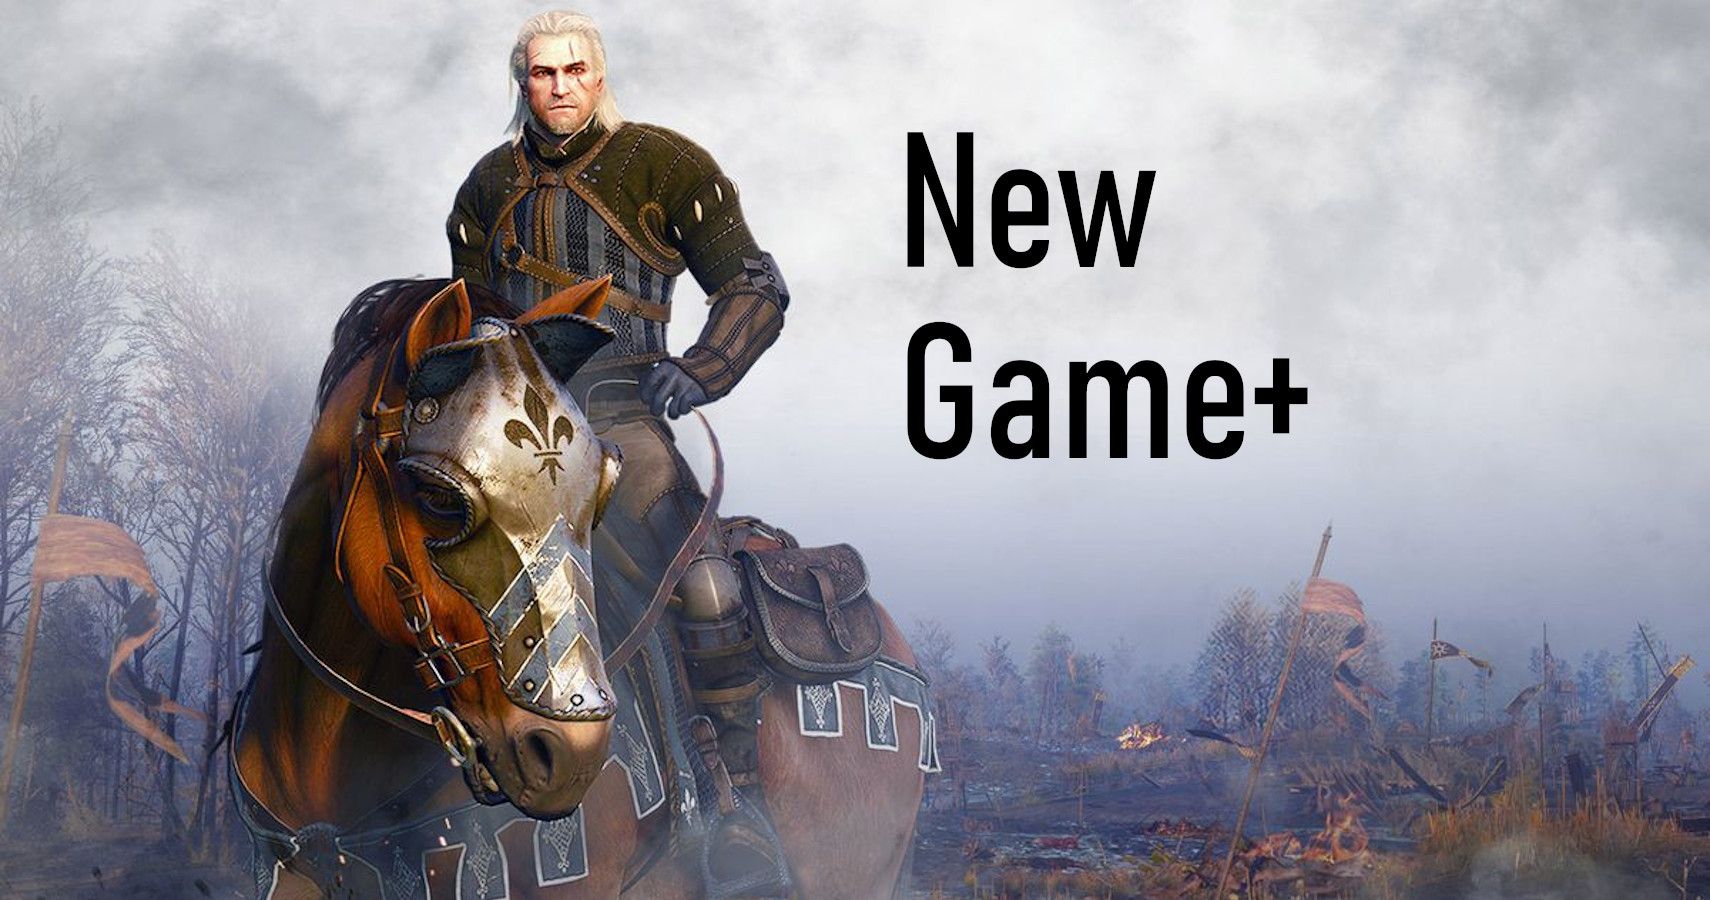 witcher 3 1.22 patch already applied